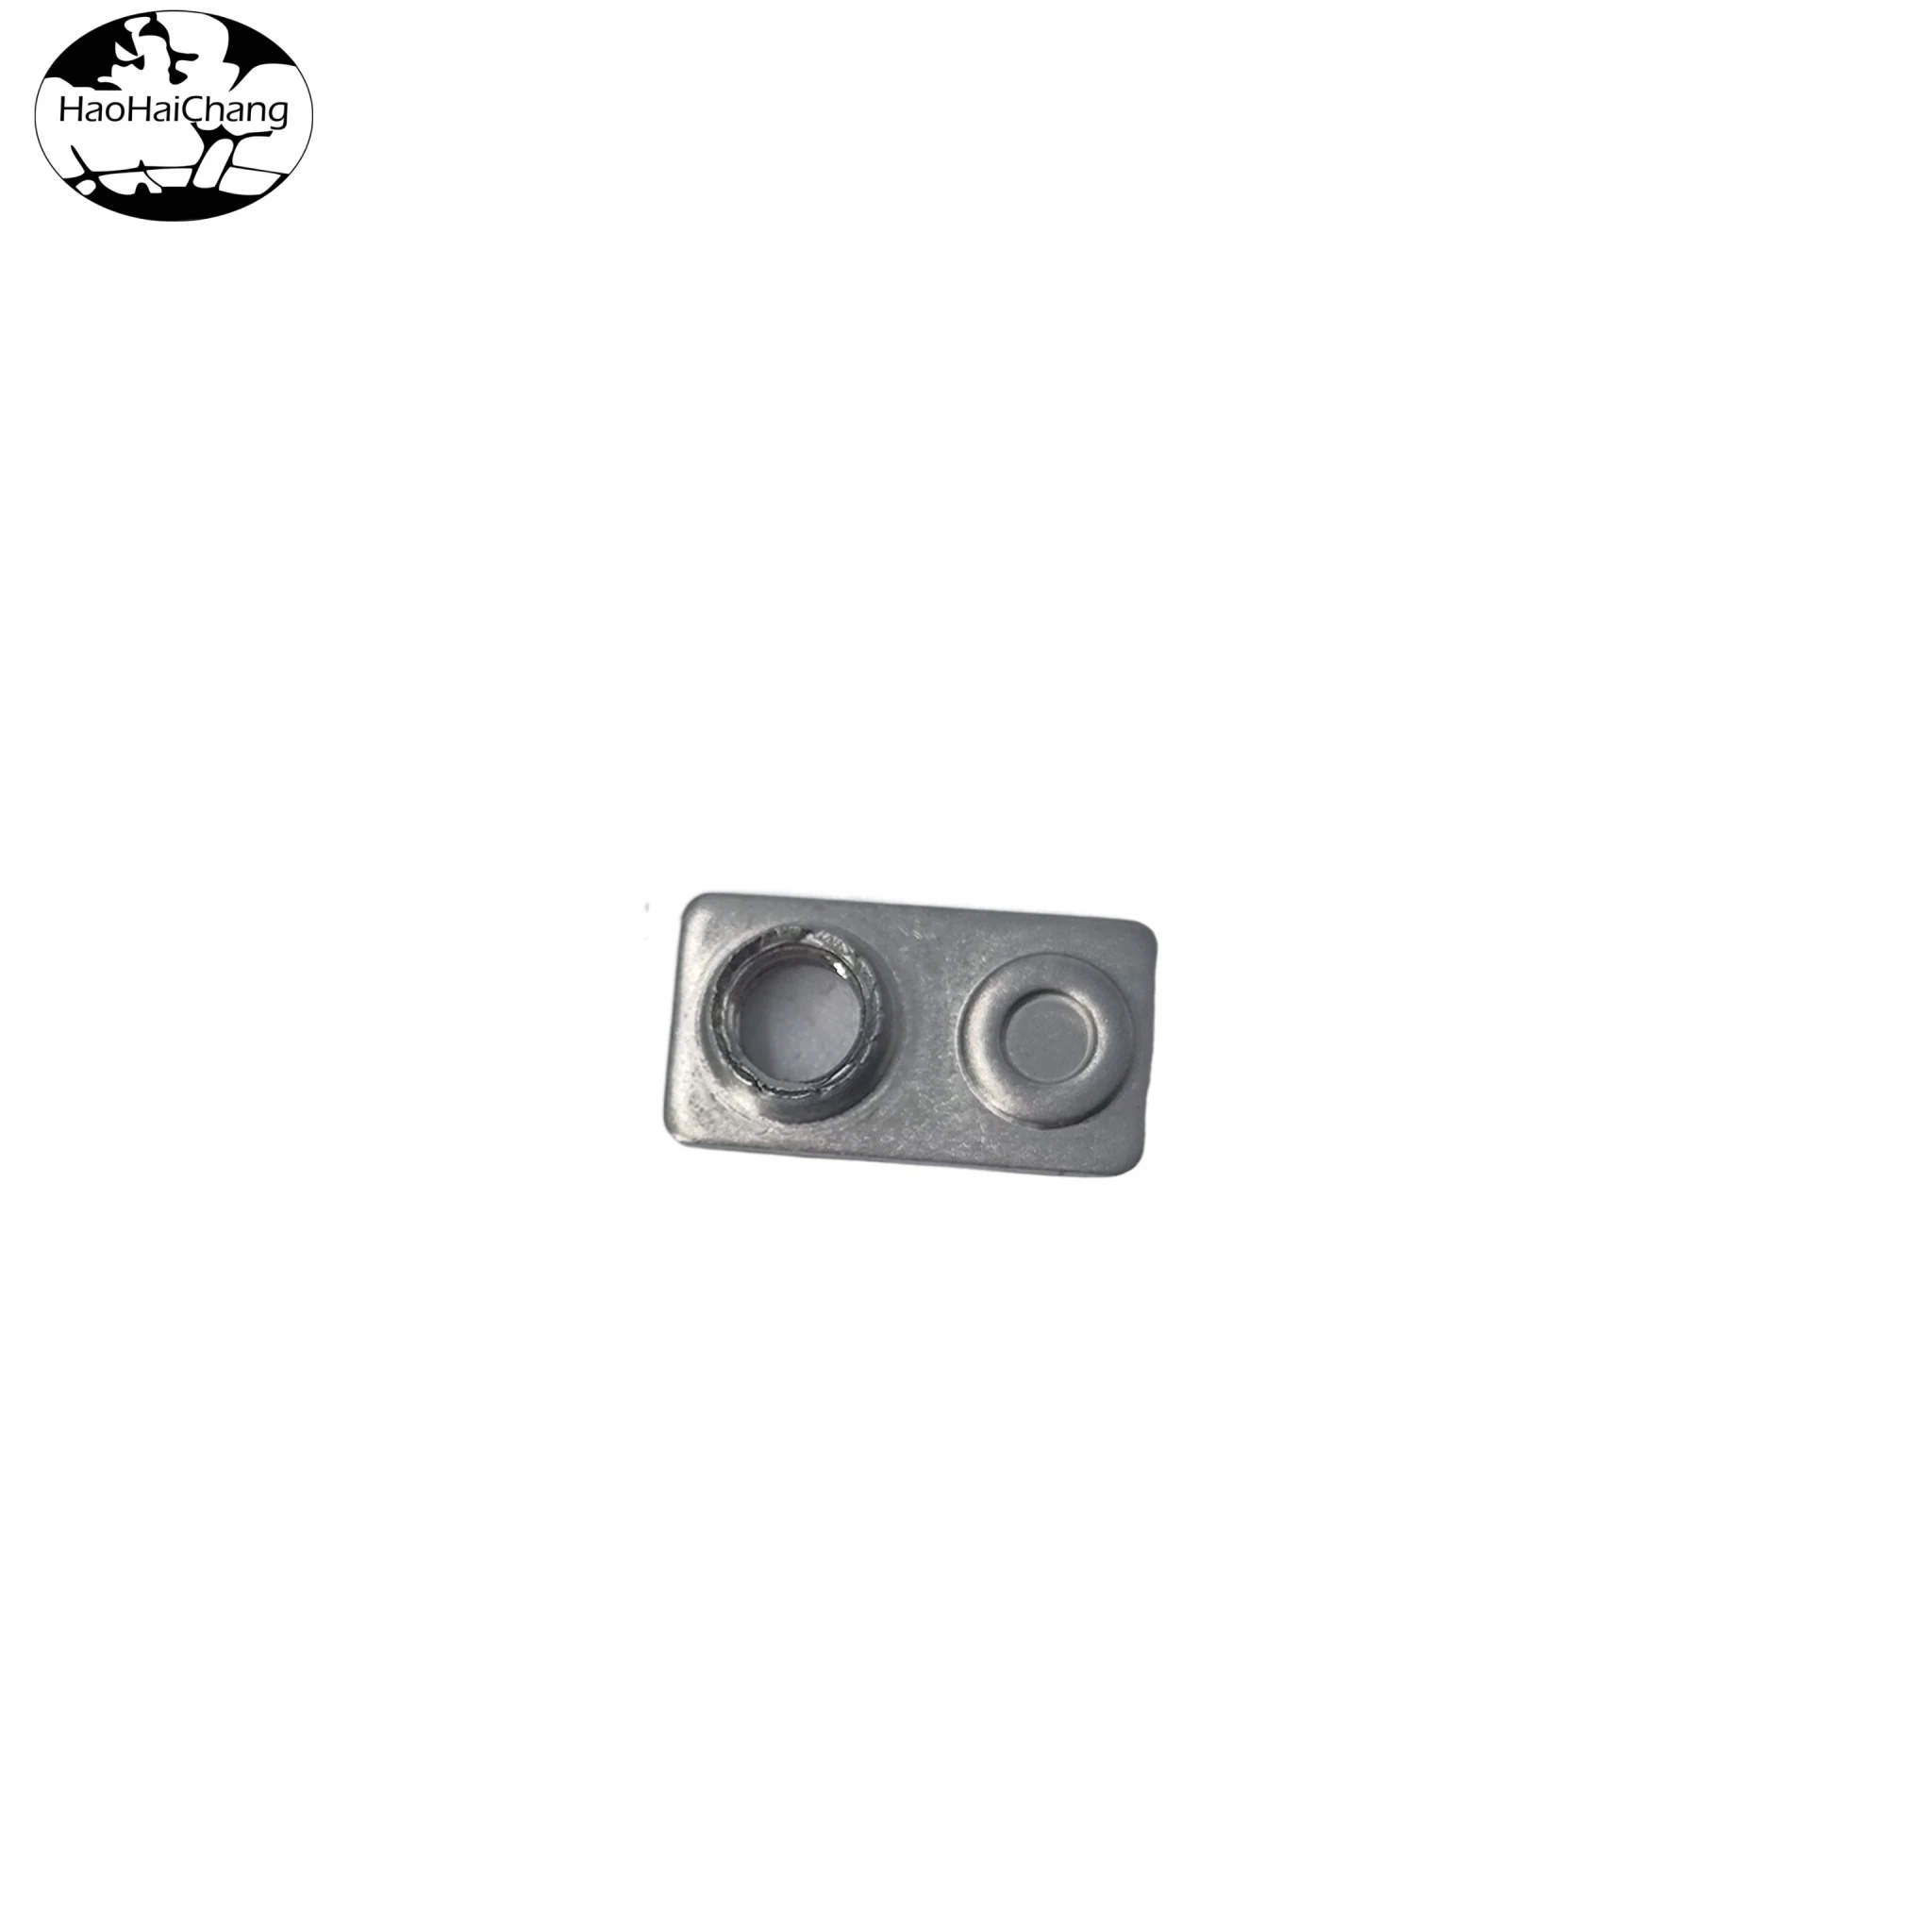 HHC-0332 Connector